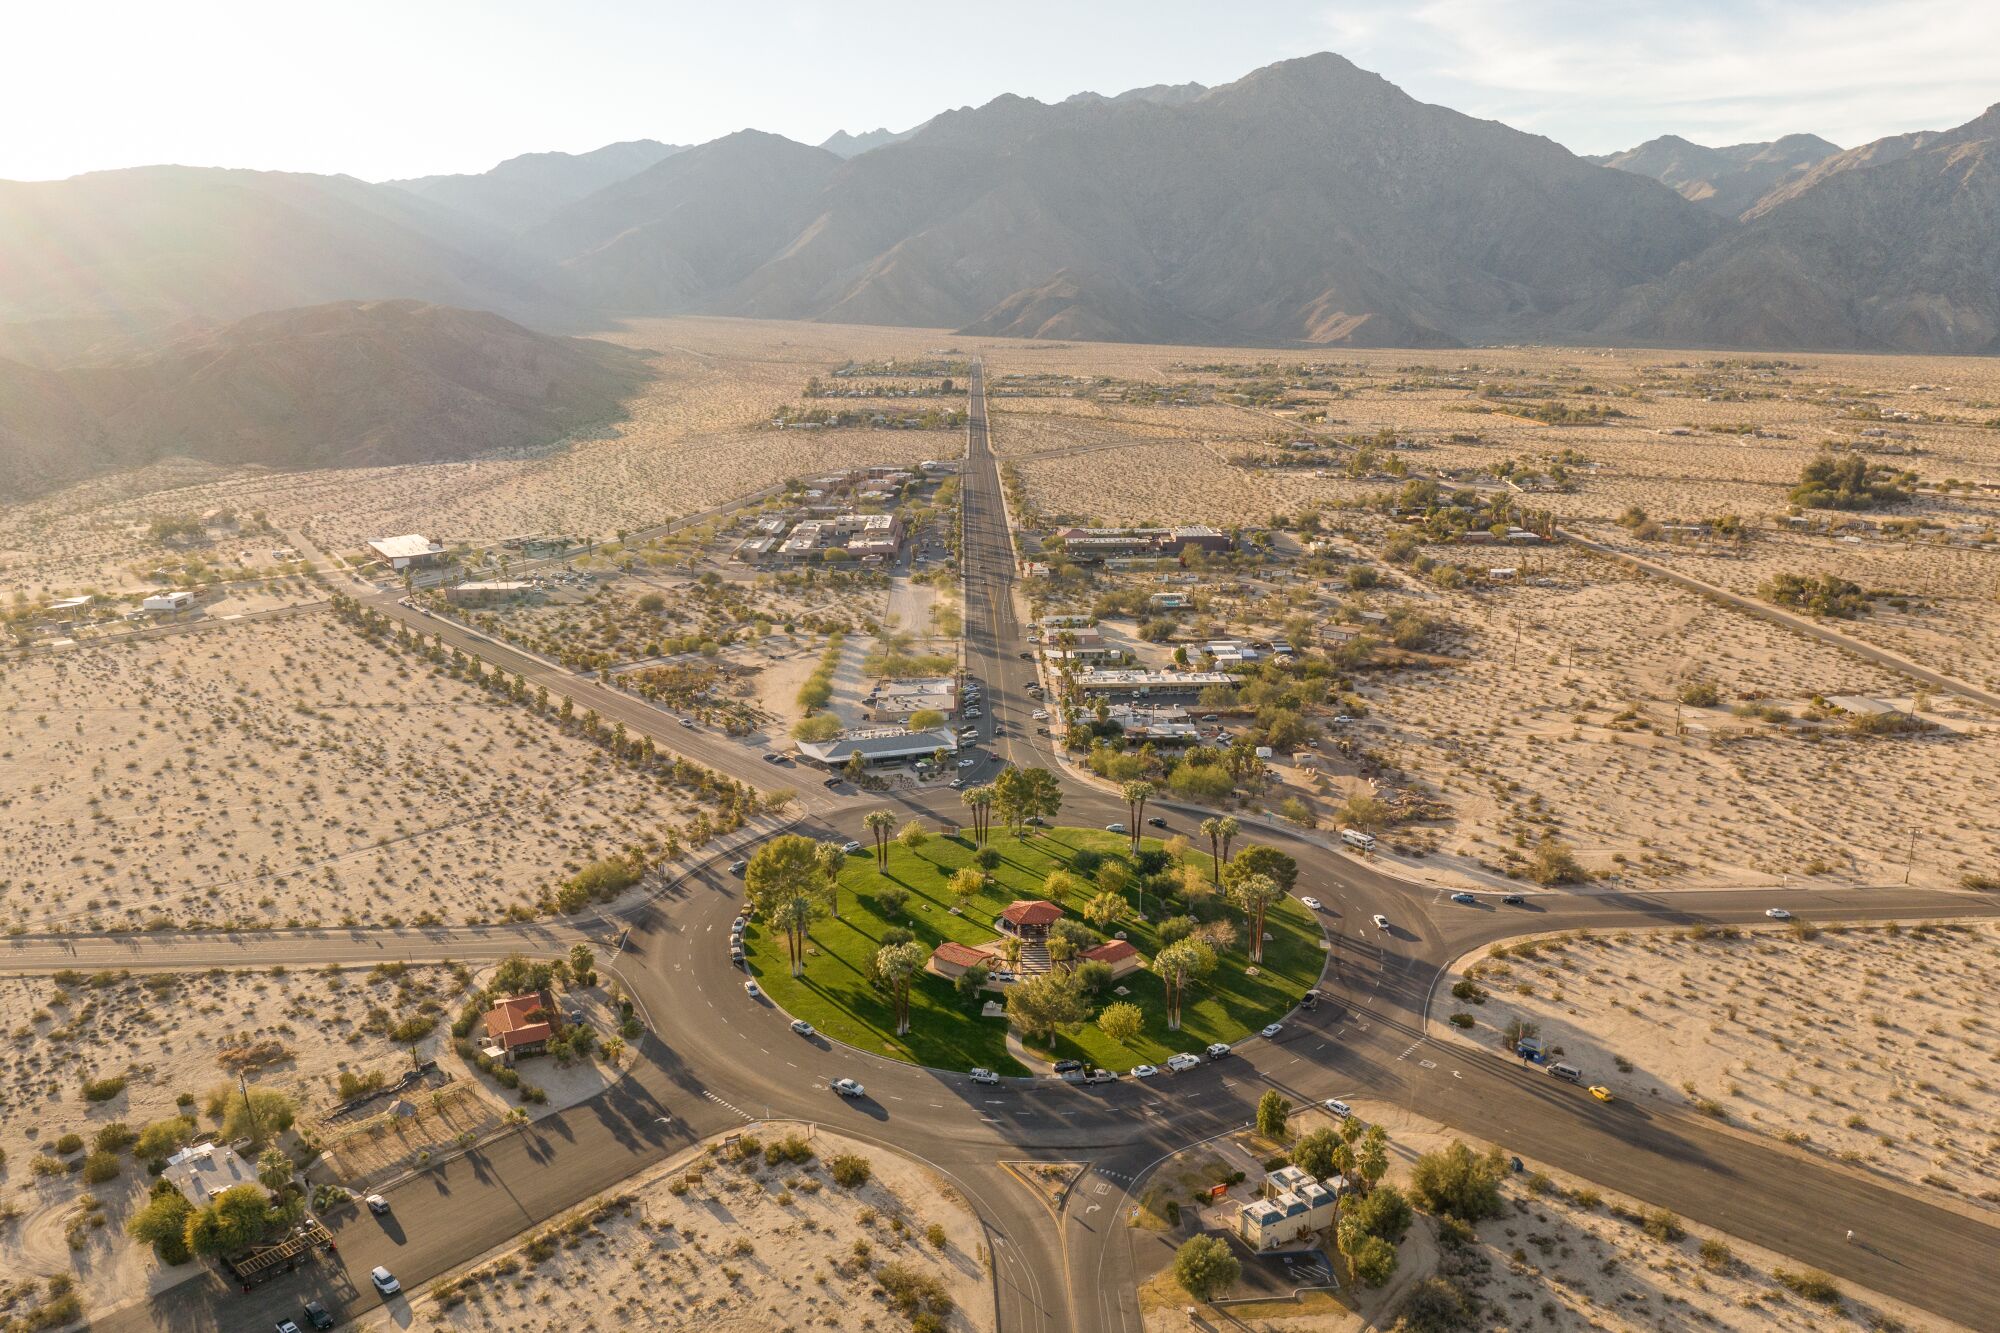 The Christmas Circle Community Park in Borrego Springs is an oasis of green in the desert landscape.